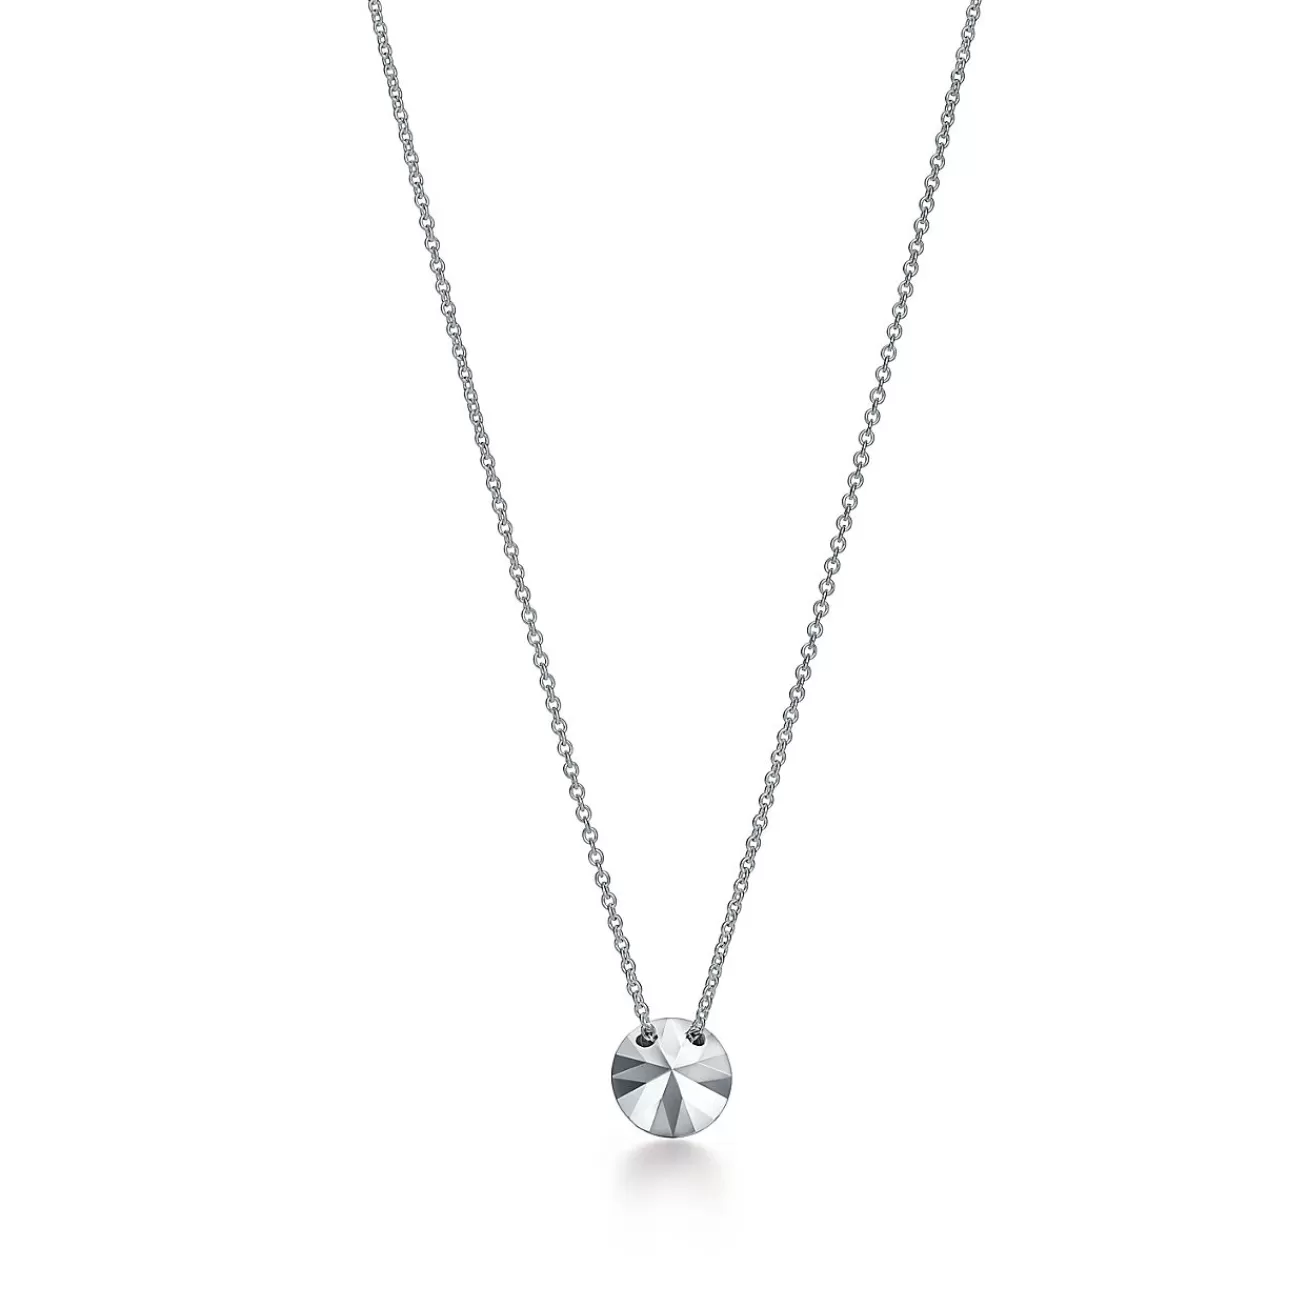 Tiffany & Co. Elsa Peretti® 2 Carat Faceted Pendant in Silver | ^ Necklaces & Pendants | Sterling Silver Jewelry